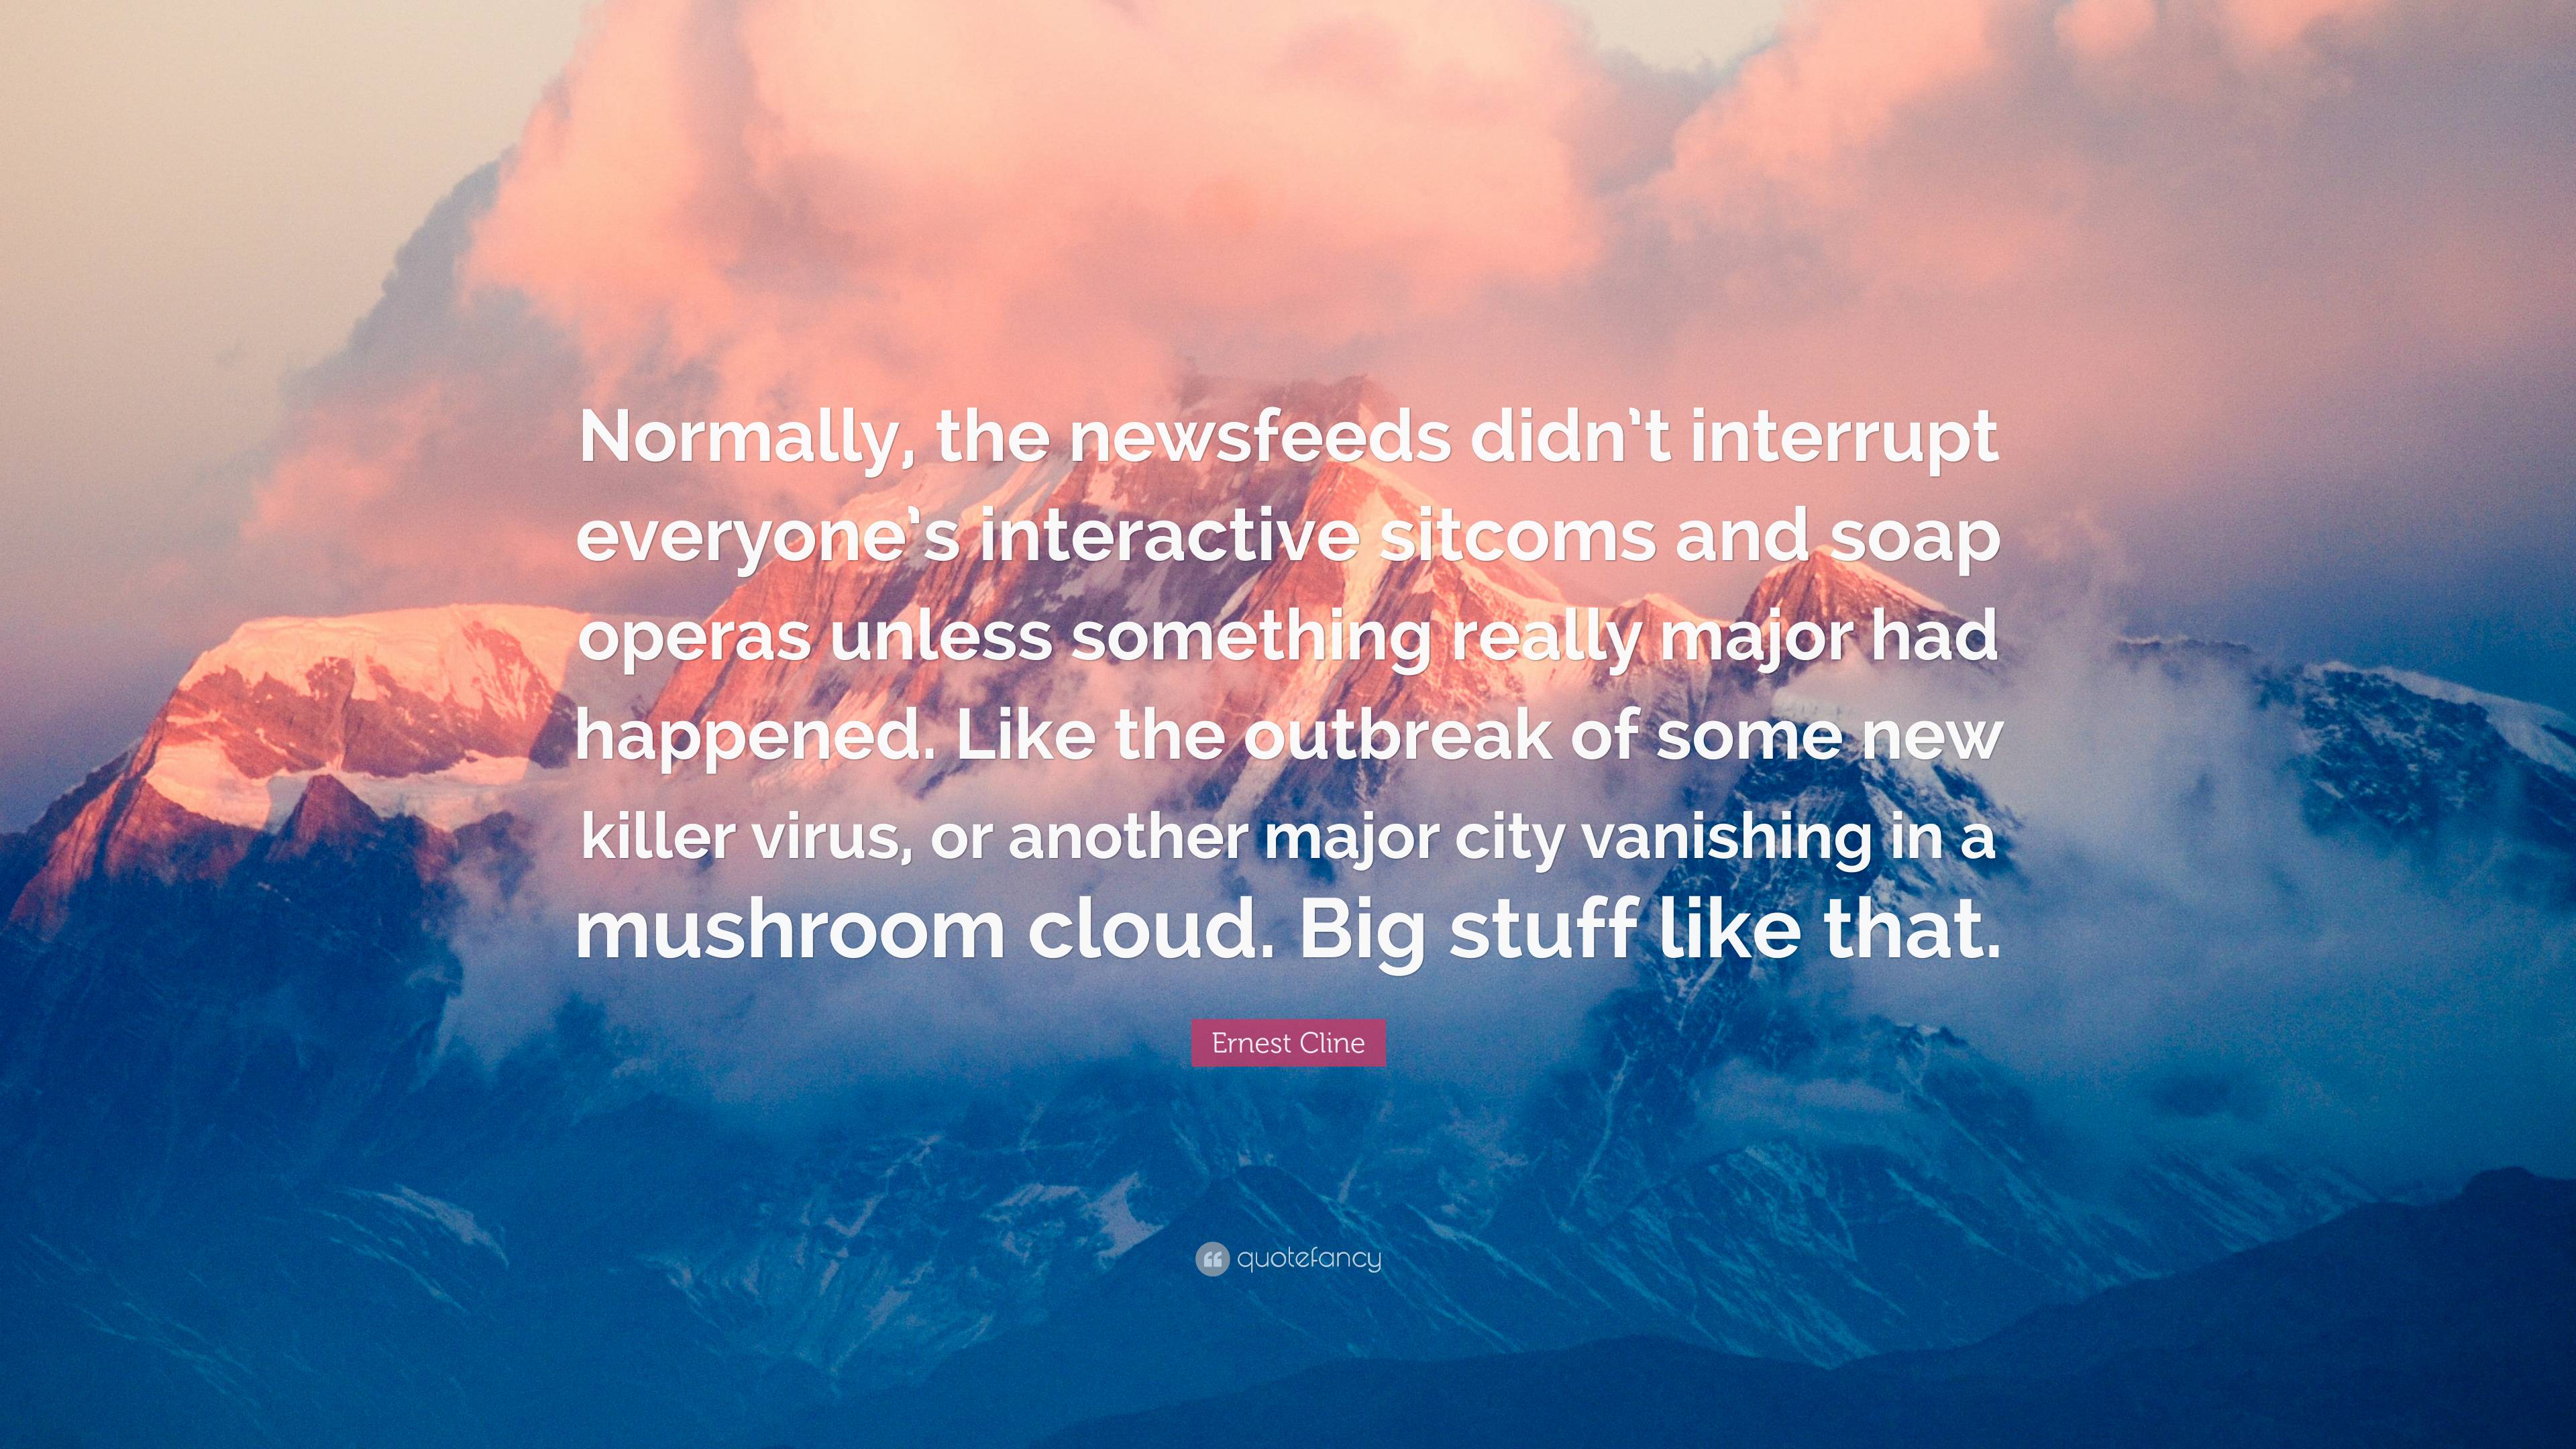 Ernest Cline Quote: “Normally, the newsfeeds didn’t interrupt everyone ...